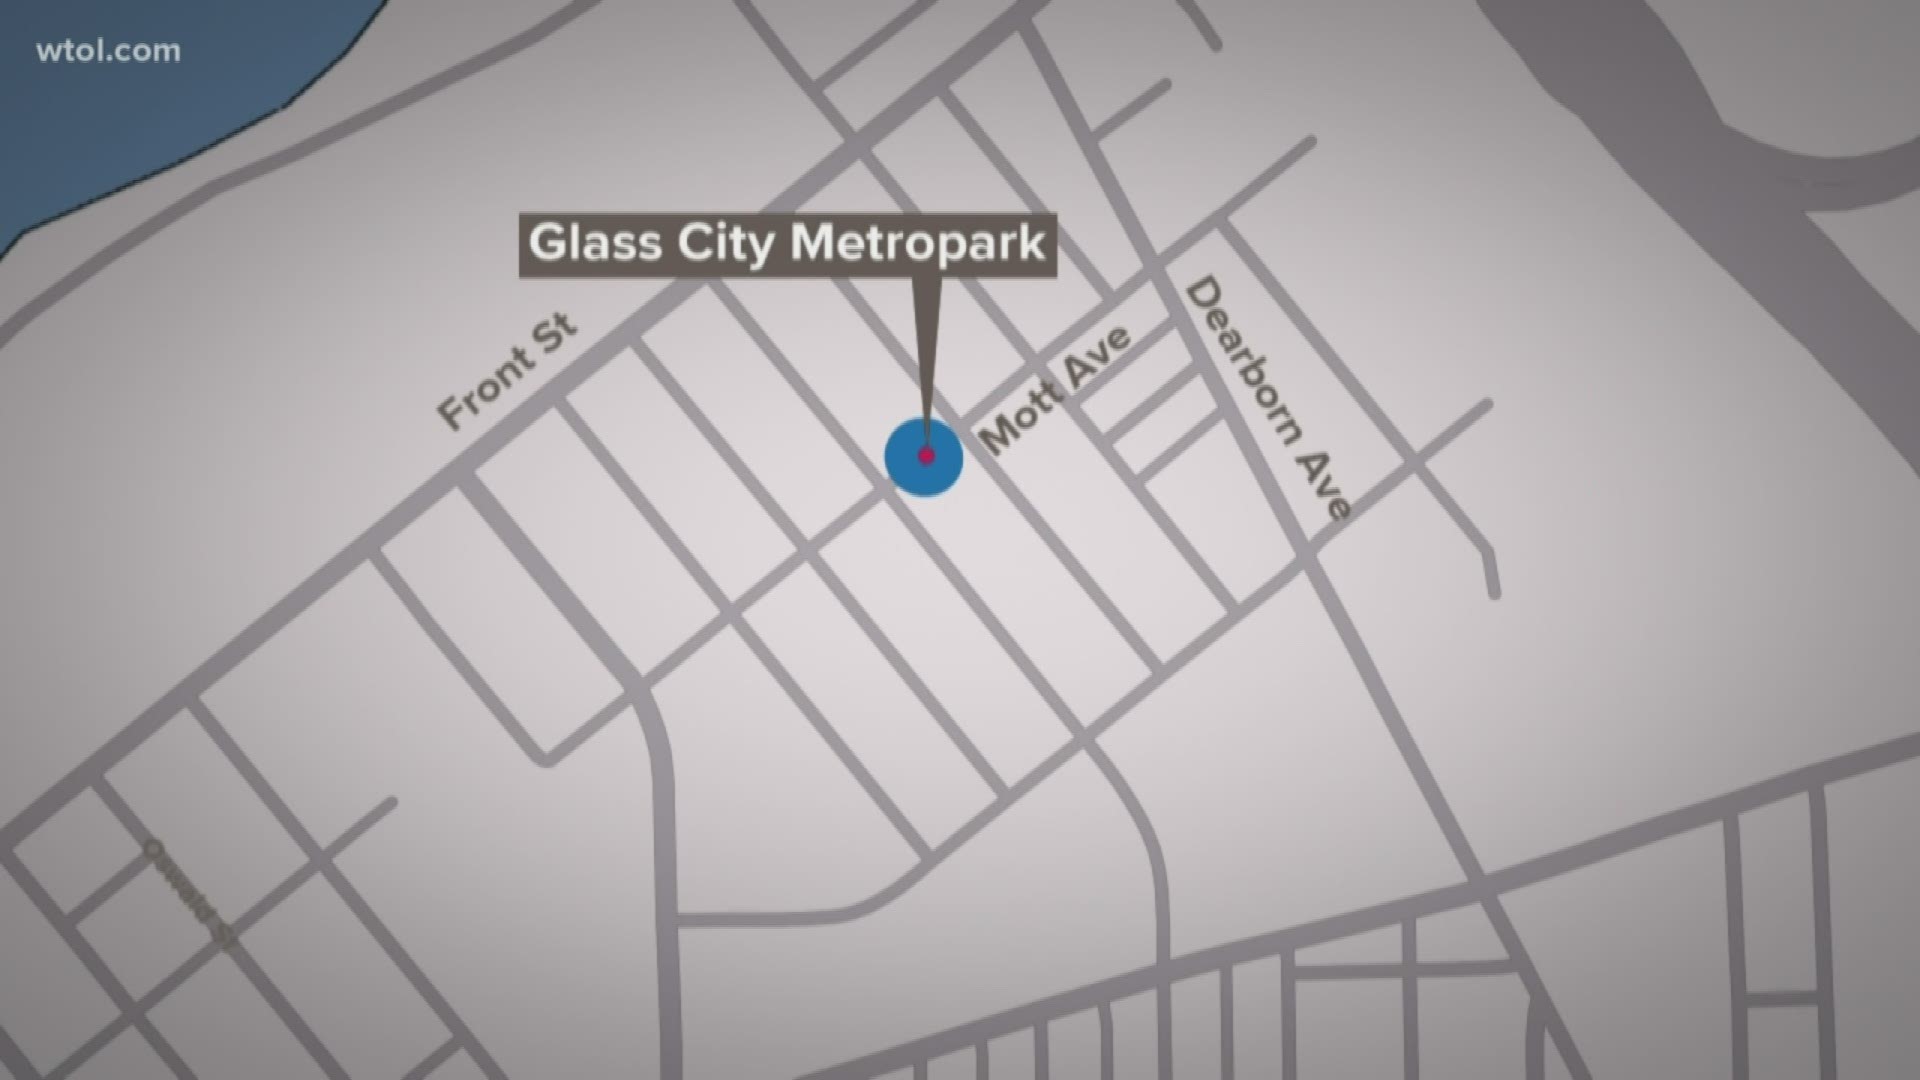 The Glass City Metropark will be located between the Martin Luther King Jr. Bridge and the Craig Street Bridge.